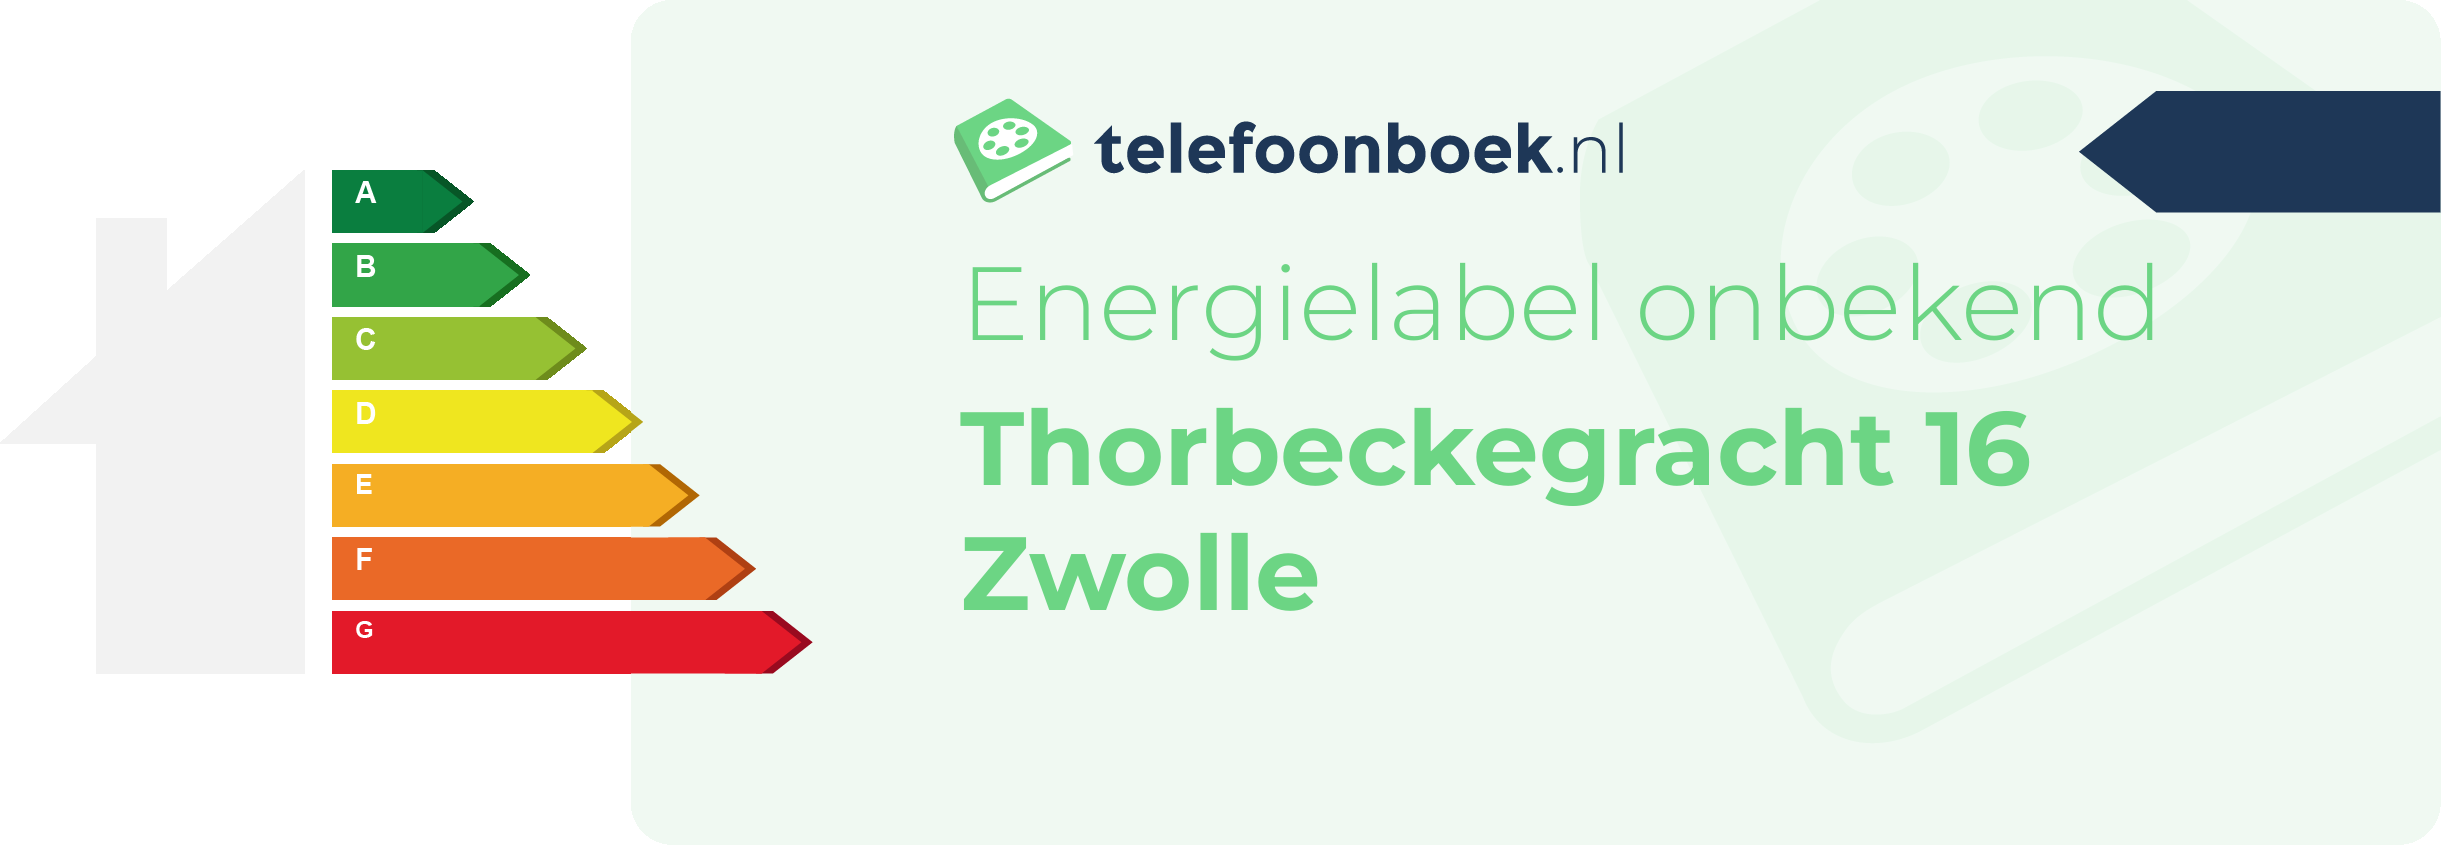 Energielabel Thorbeckegracht 16 Zwolle